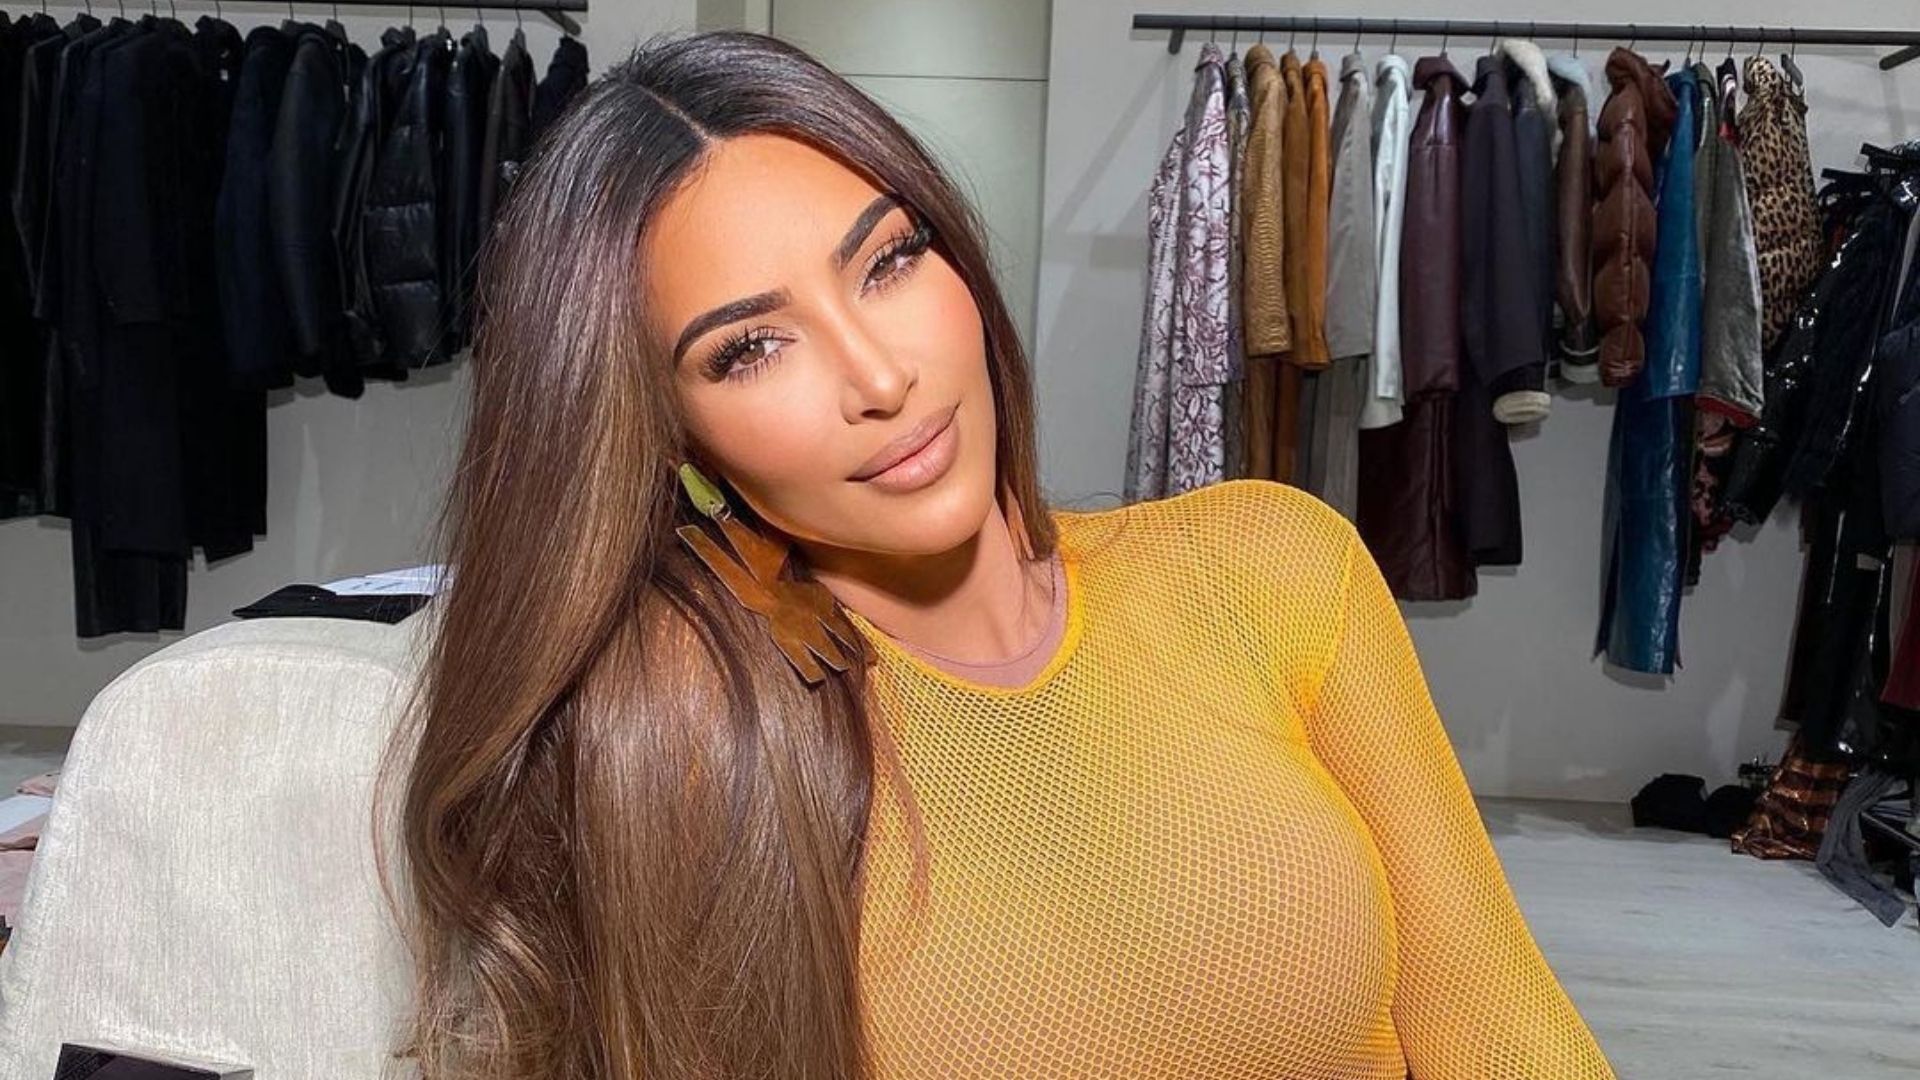 The Foolproof Way Kim Kardashian West Deals With Internet 